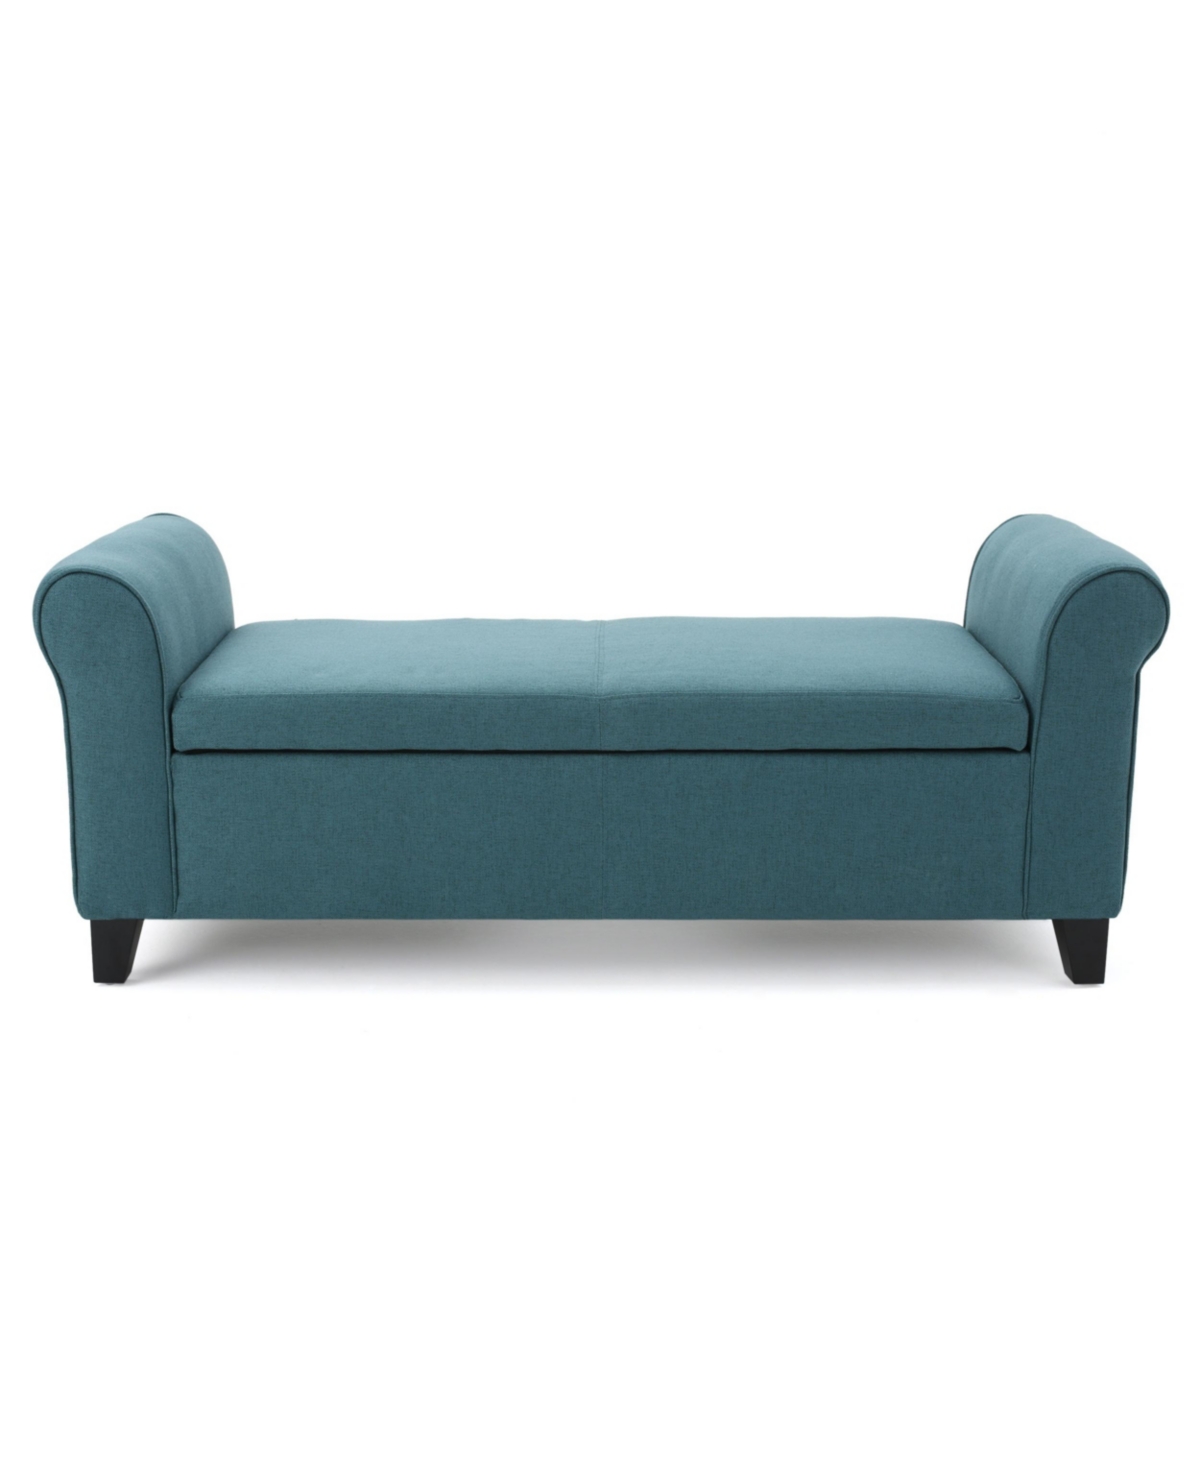 Noble House Hayes Contemporary Upholstered Storage Ottoman Bench With Rolled Arms In Dark Teal